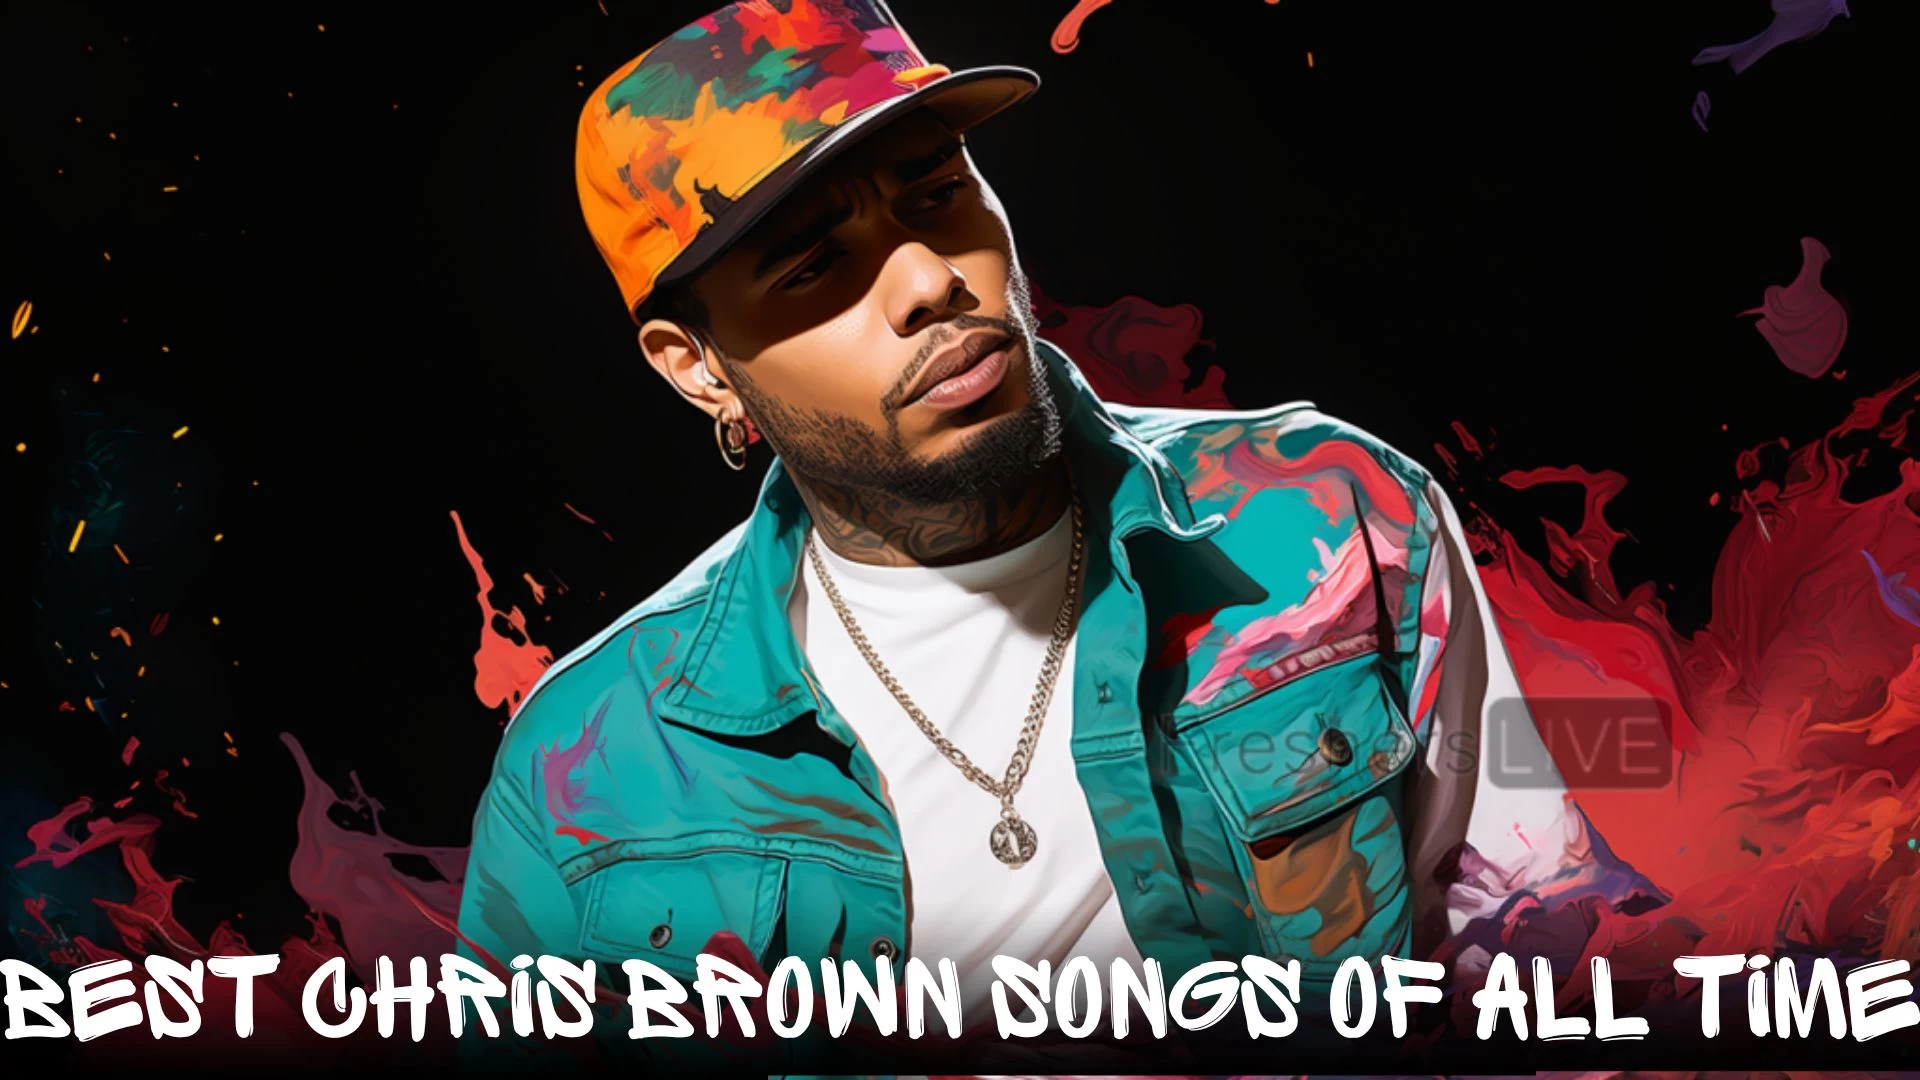 Best Chris Brown Songs of All Time - Top 10 Soulful Sounds